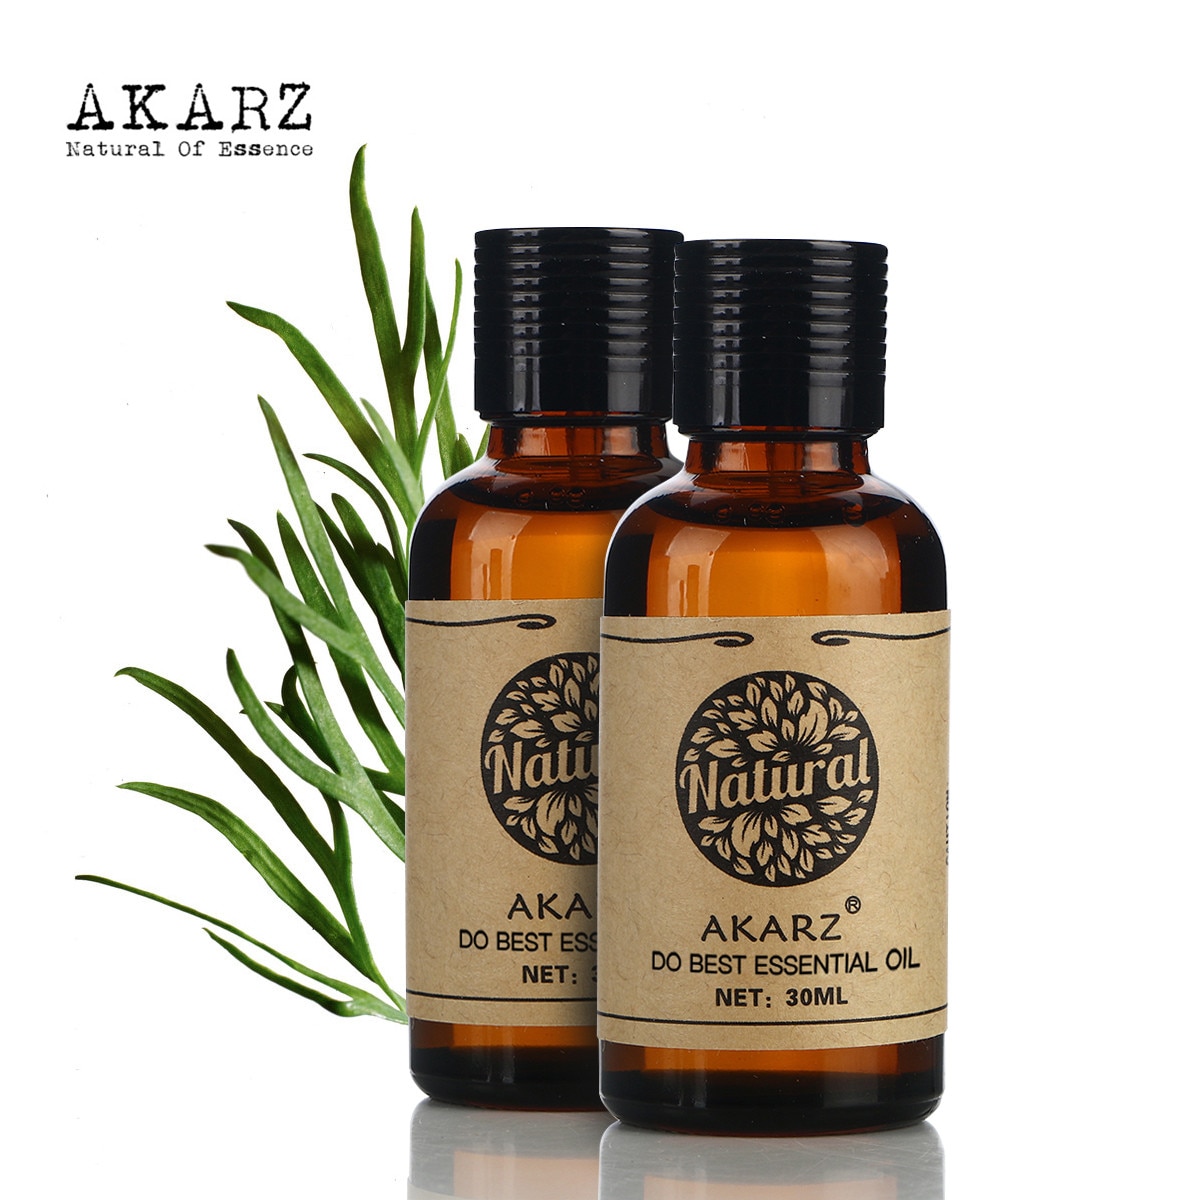 AKARZ Famous brand Relaxed sets natural aromatherapy Peppermint oil Jasmine oil body Massage Oil 30ml*2